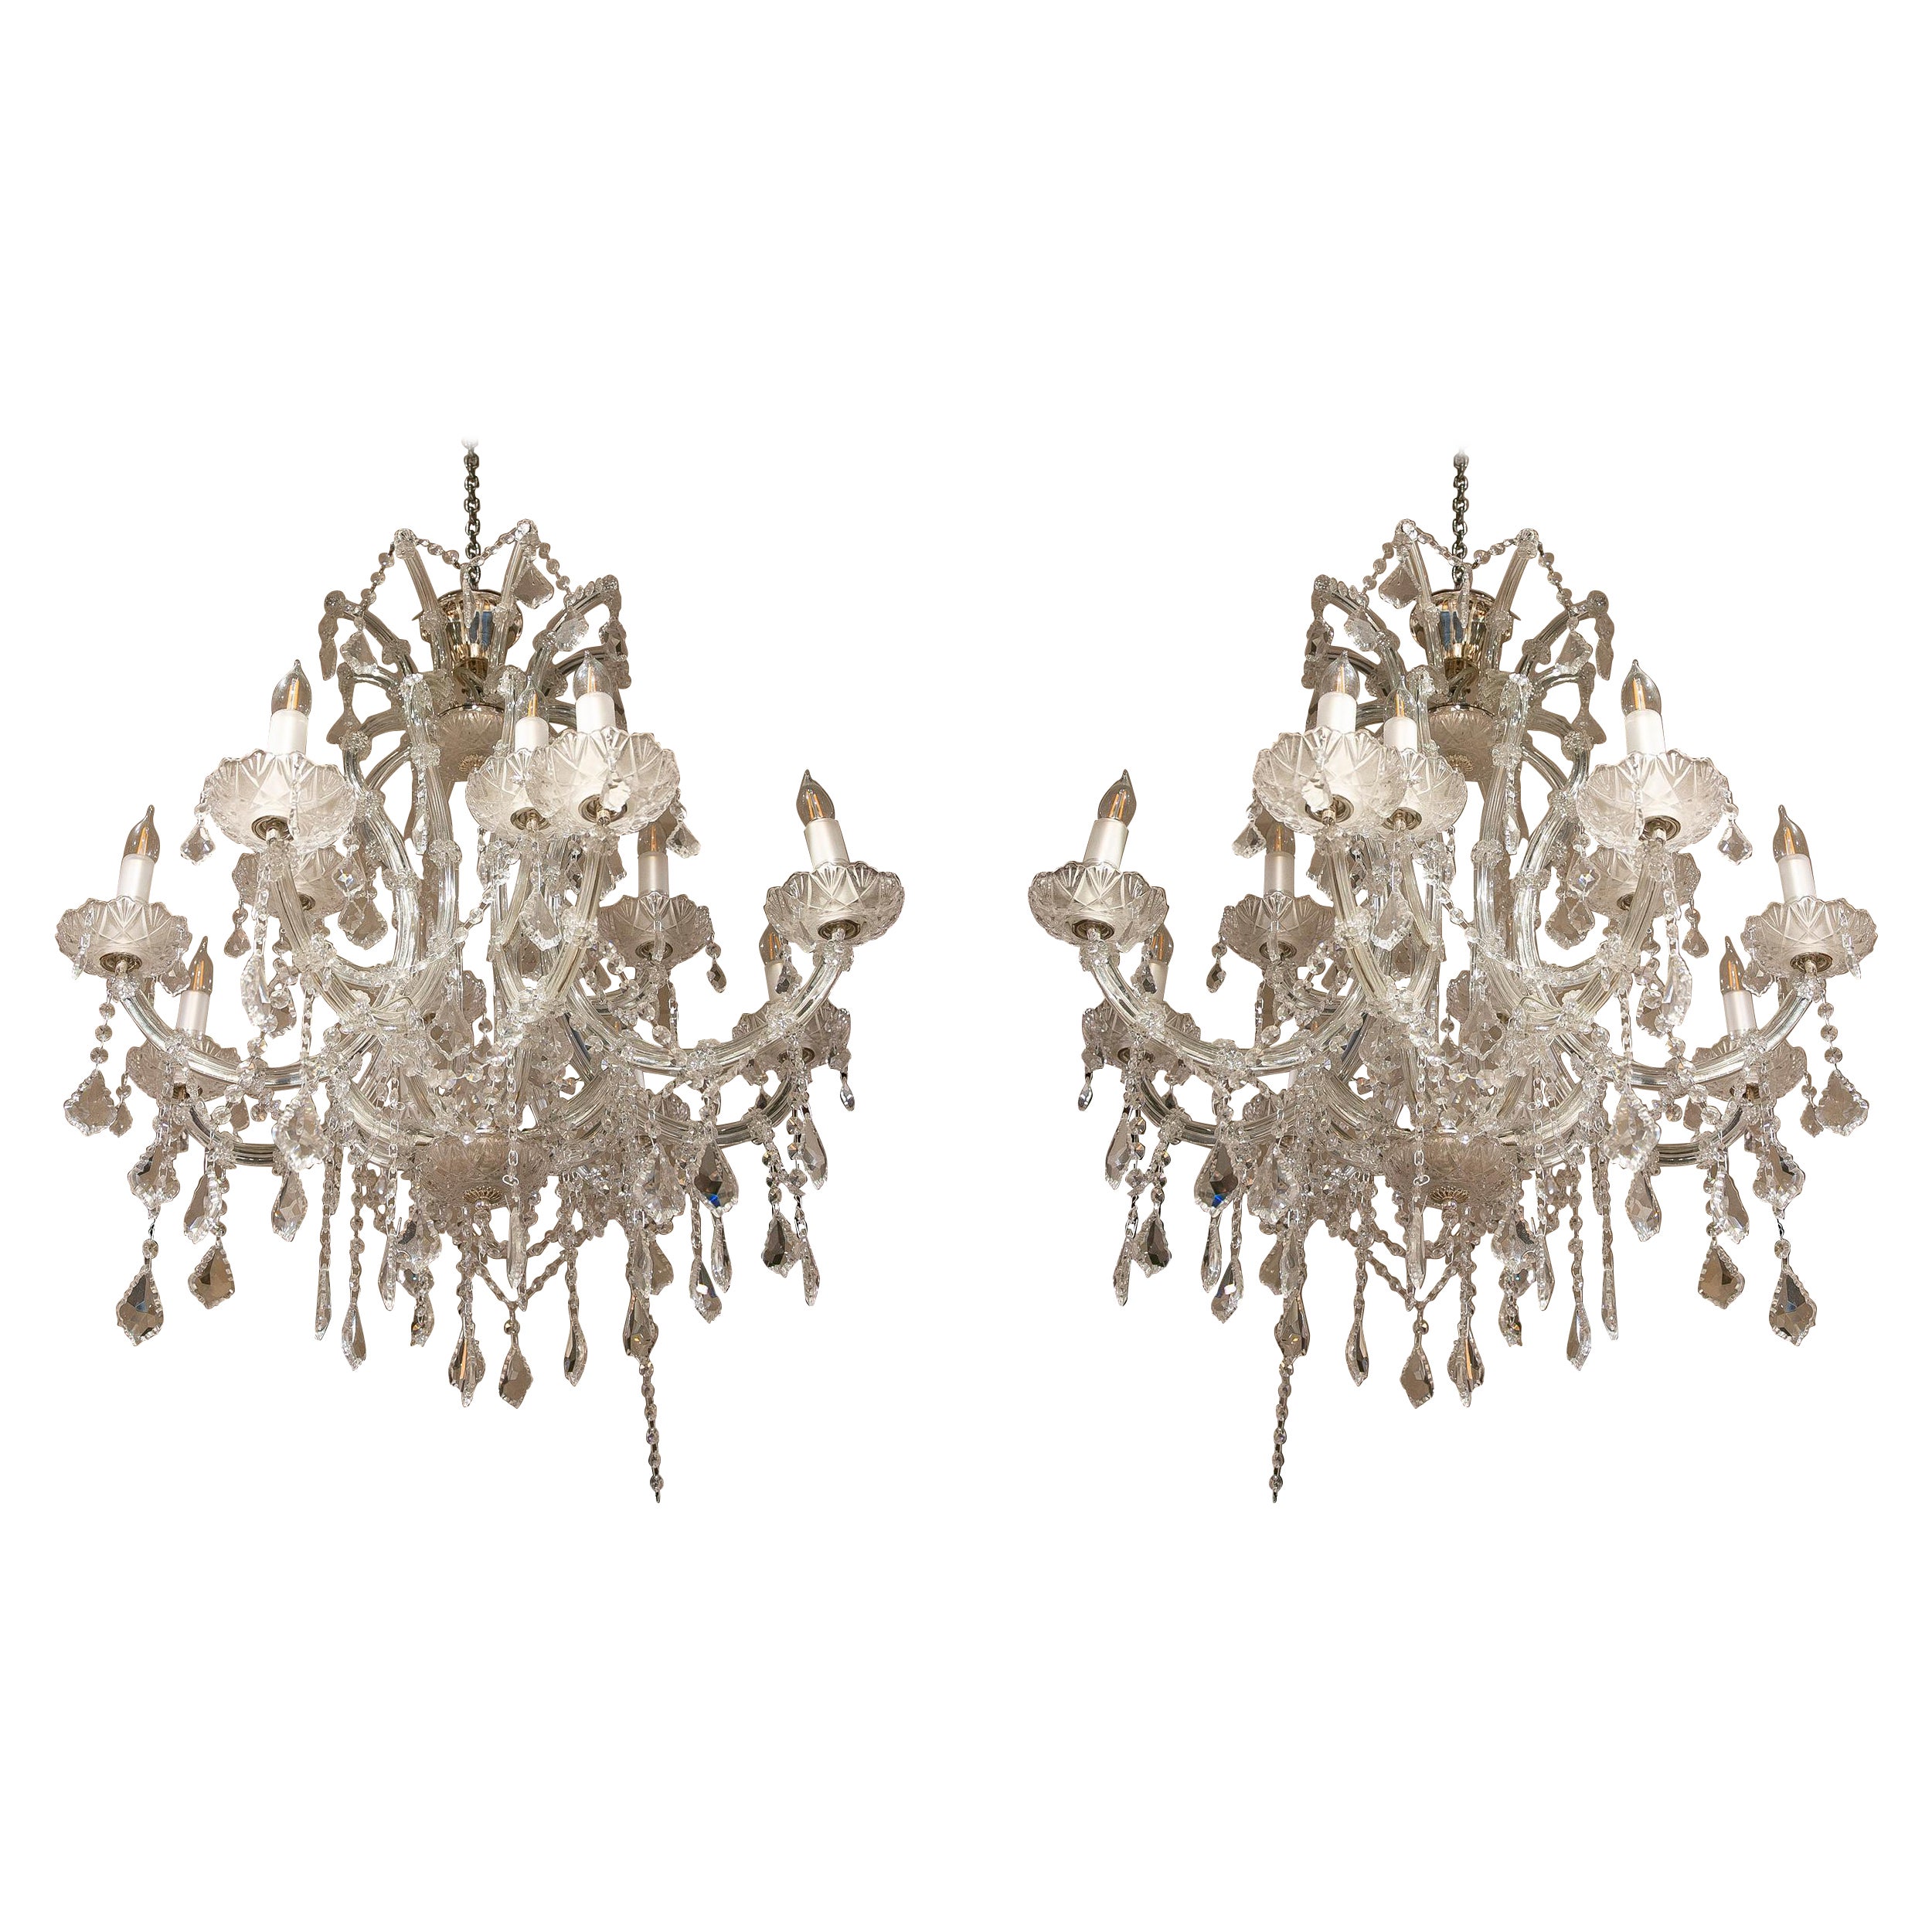 French Style Pair of Crystal Chandeliers with Arms For Sale